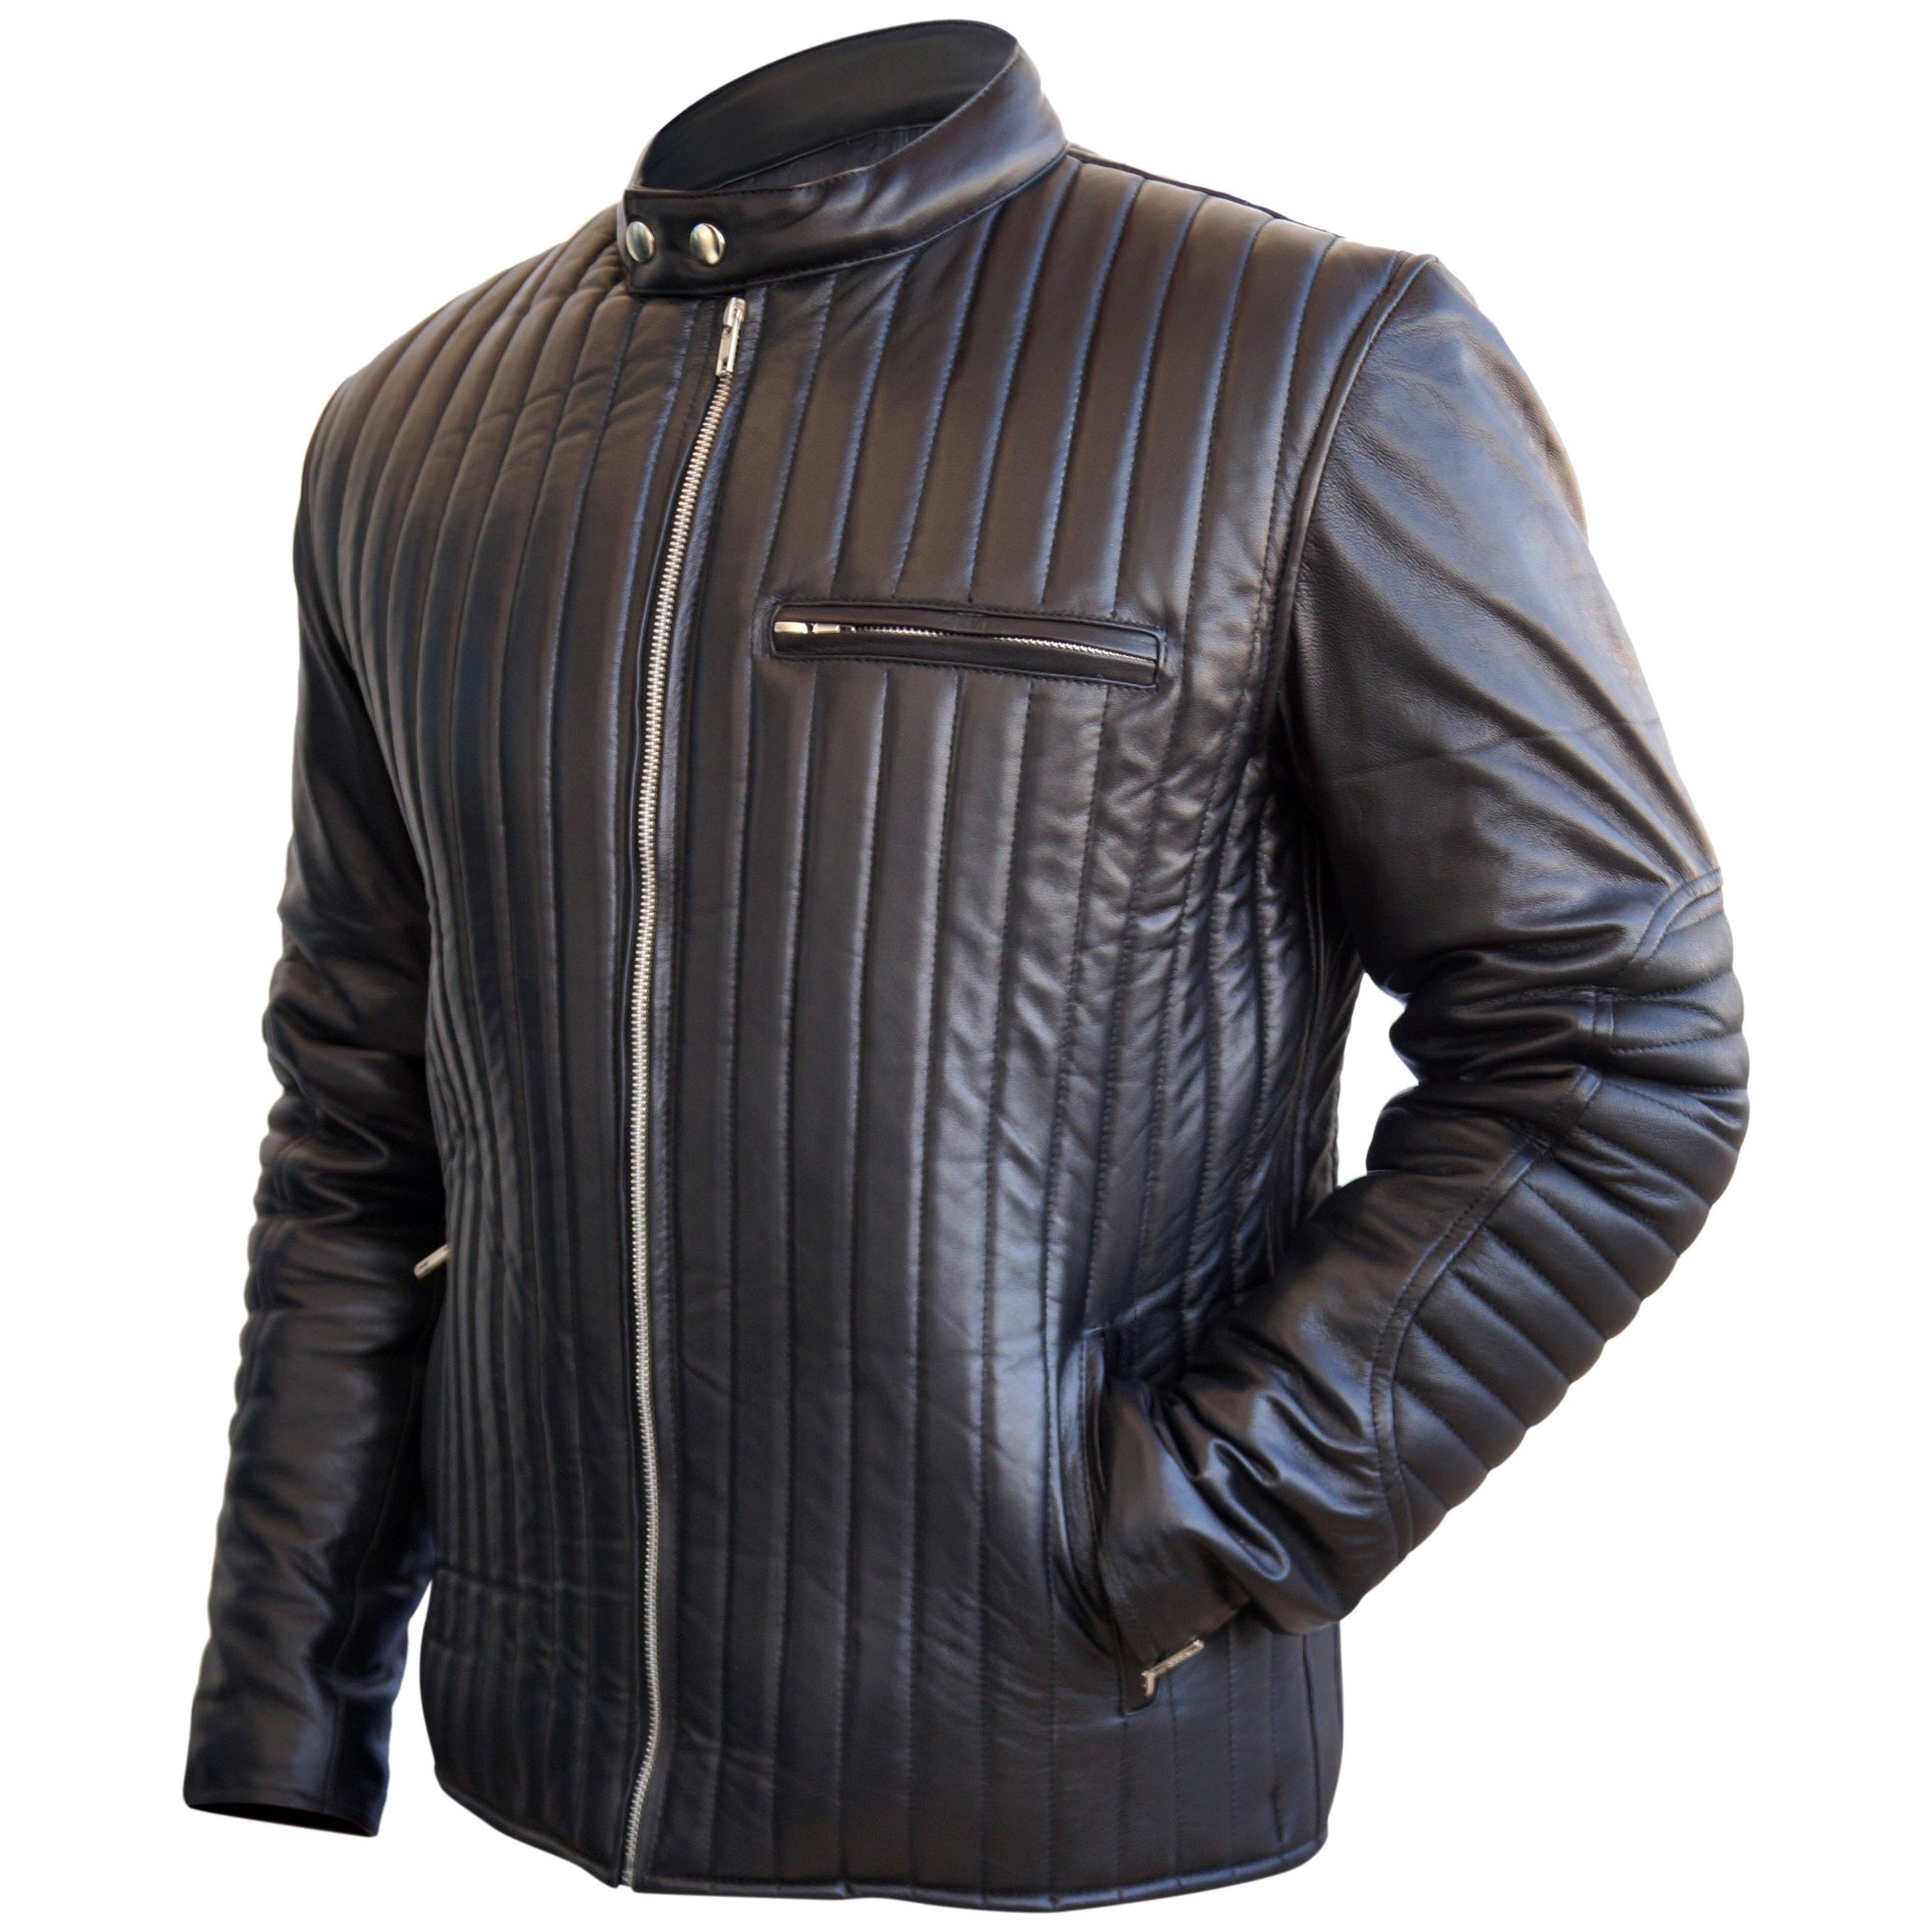 Home / Products / Leather Skin Men Black Rib Quilted Genuine Leather Jacket